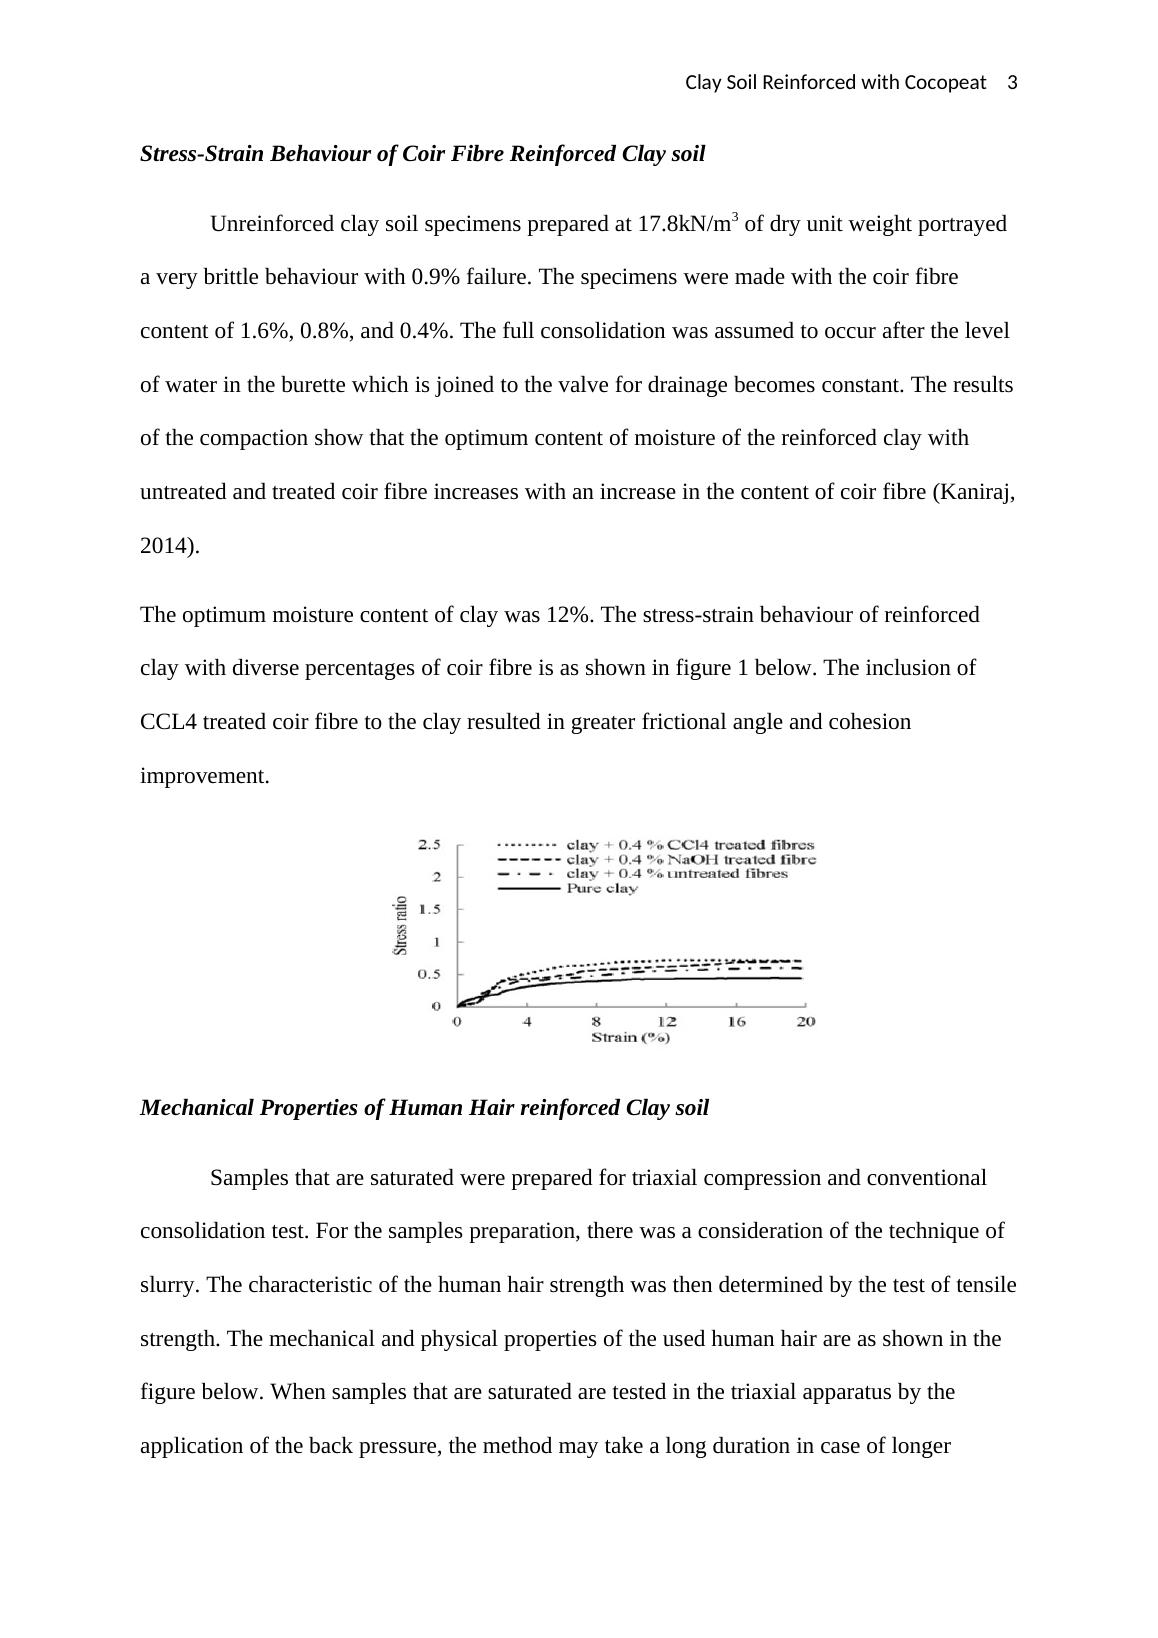 Research Paper on Clay Soil Reinforced with Cocopeat_3